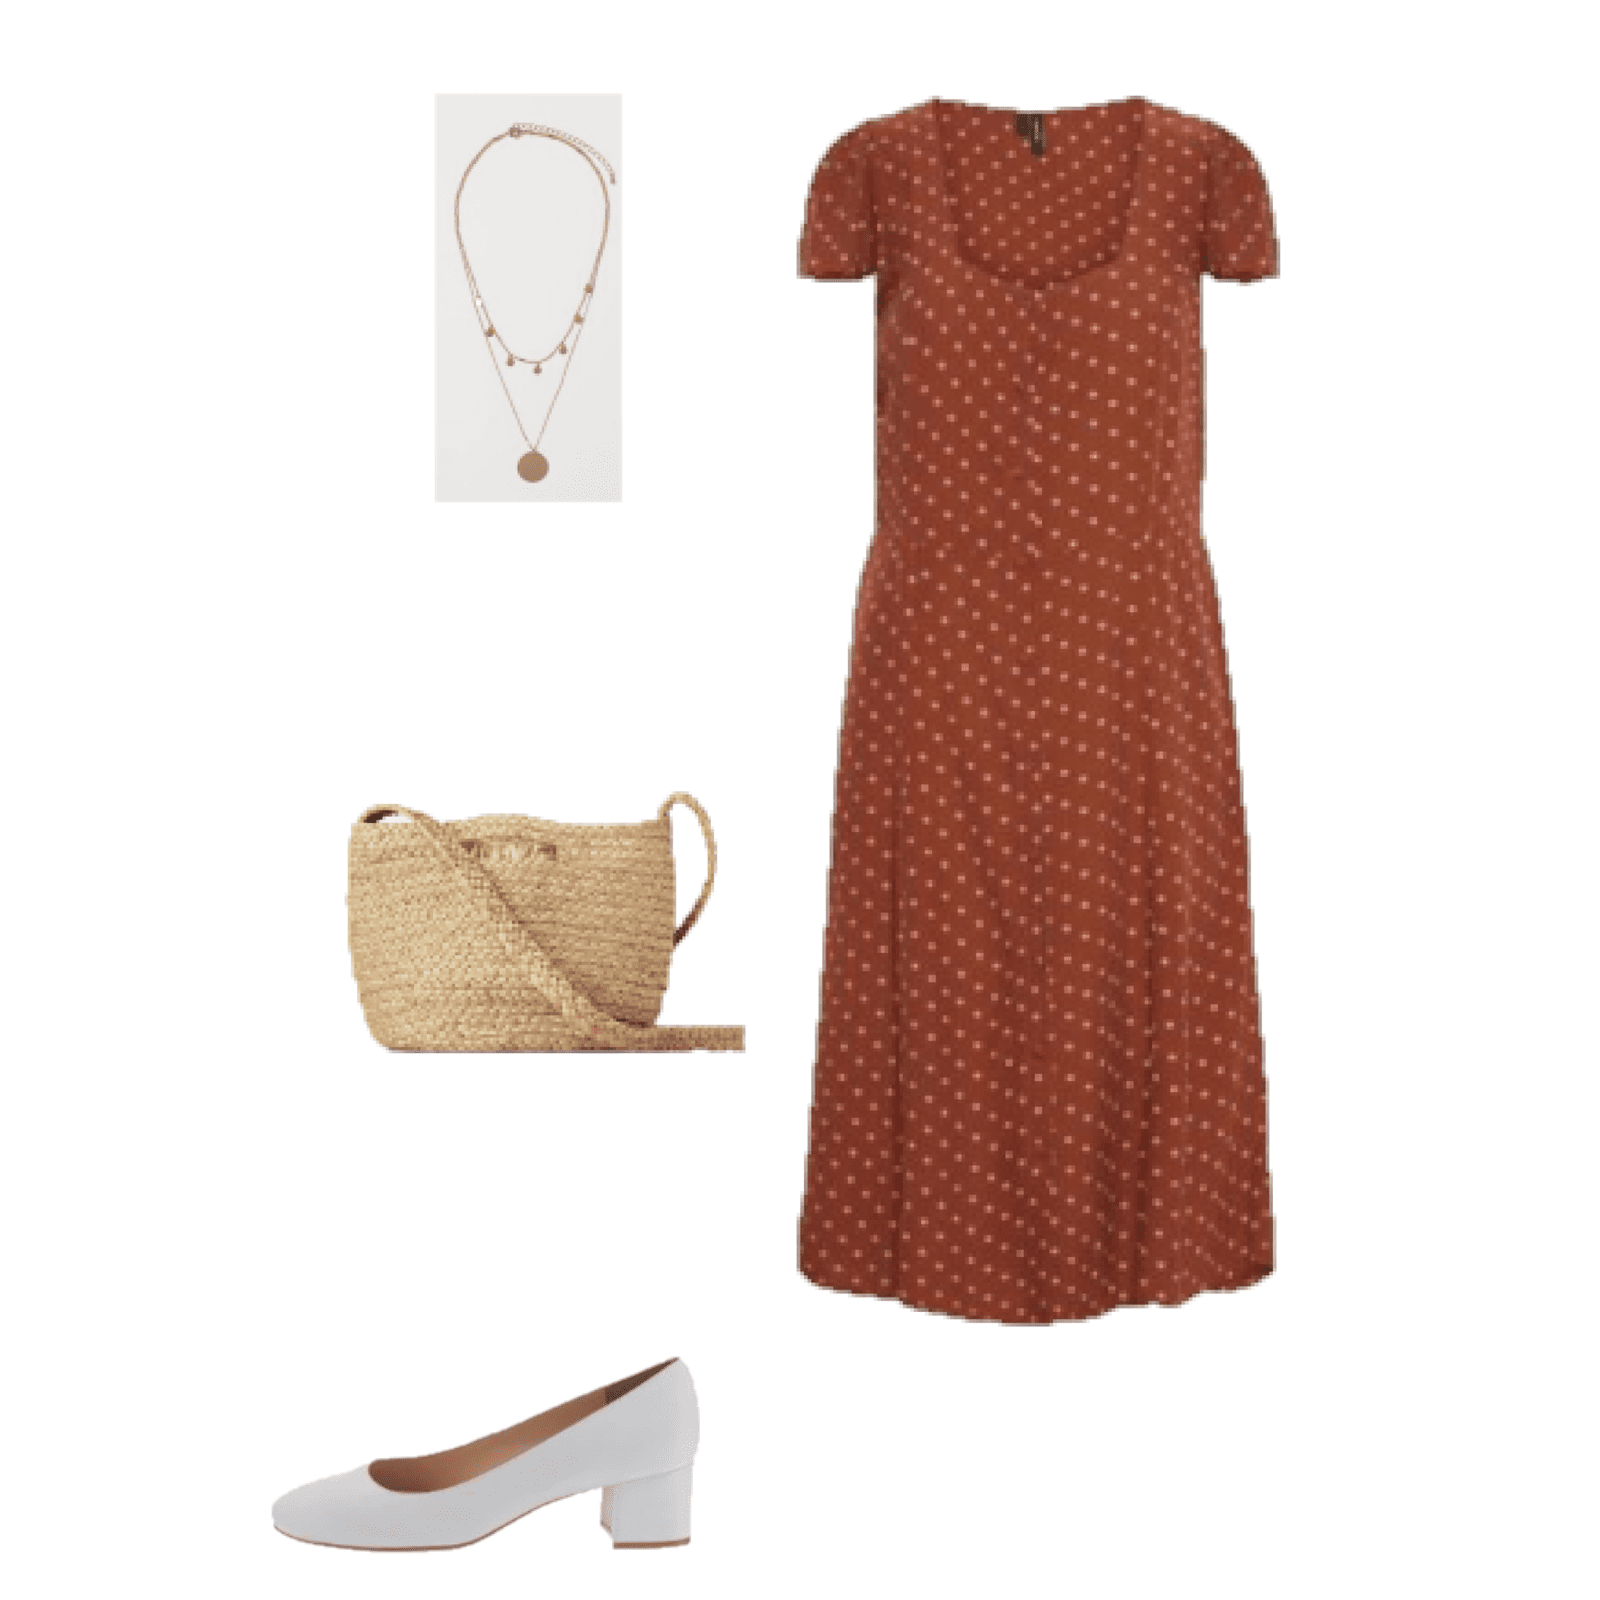 Outfit of the Day: A brown polka-dot dress